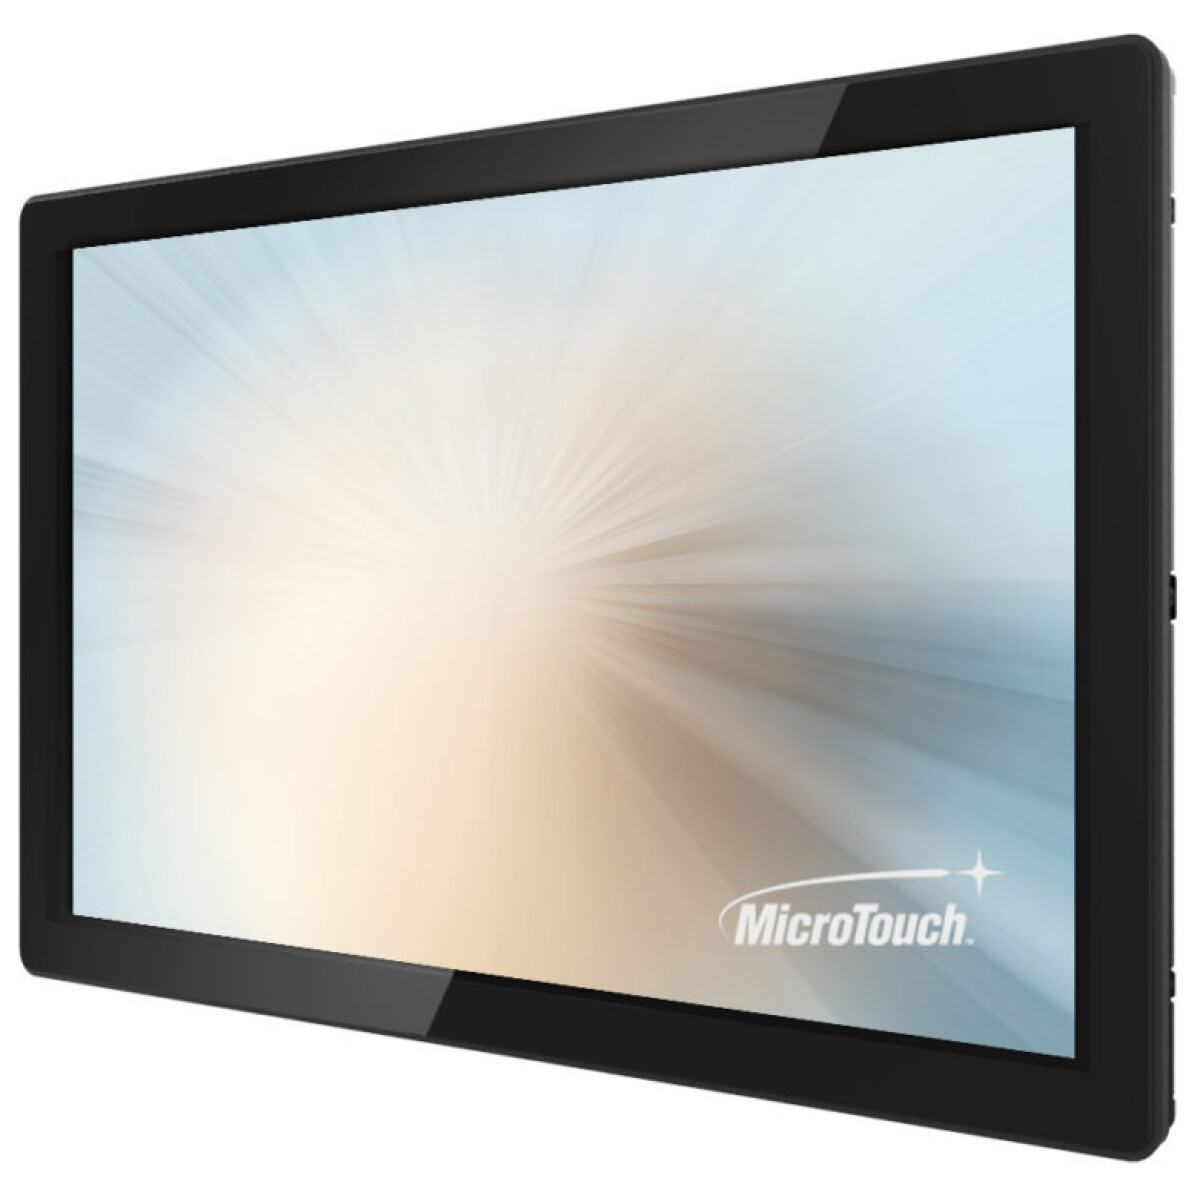 Microtouch OF-215P-B1 - 21.5in PCAP Open Frame